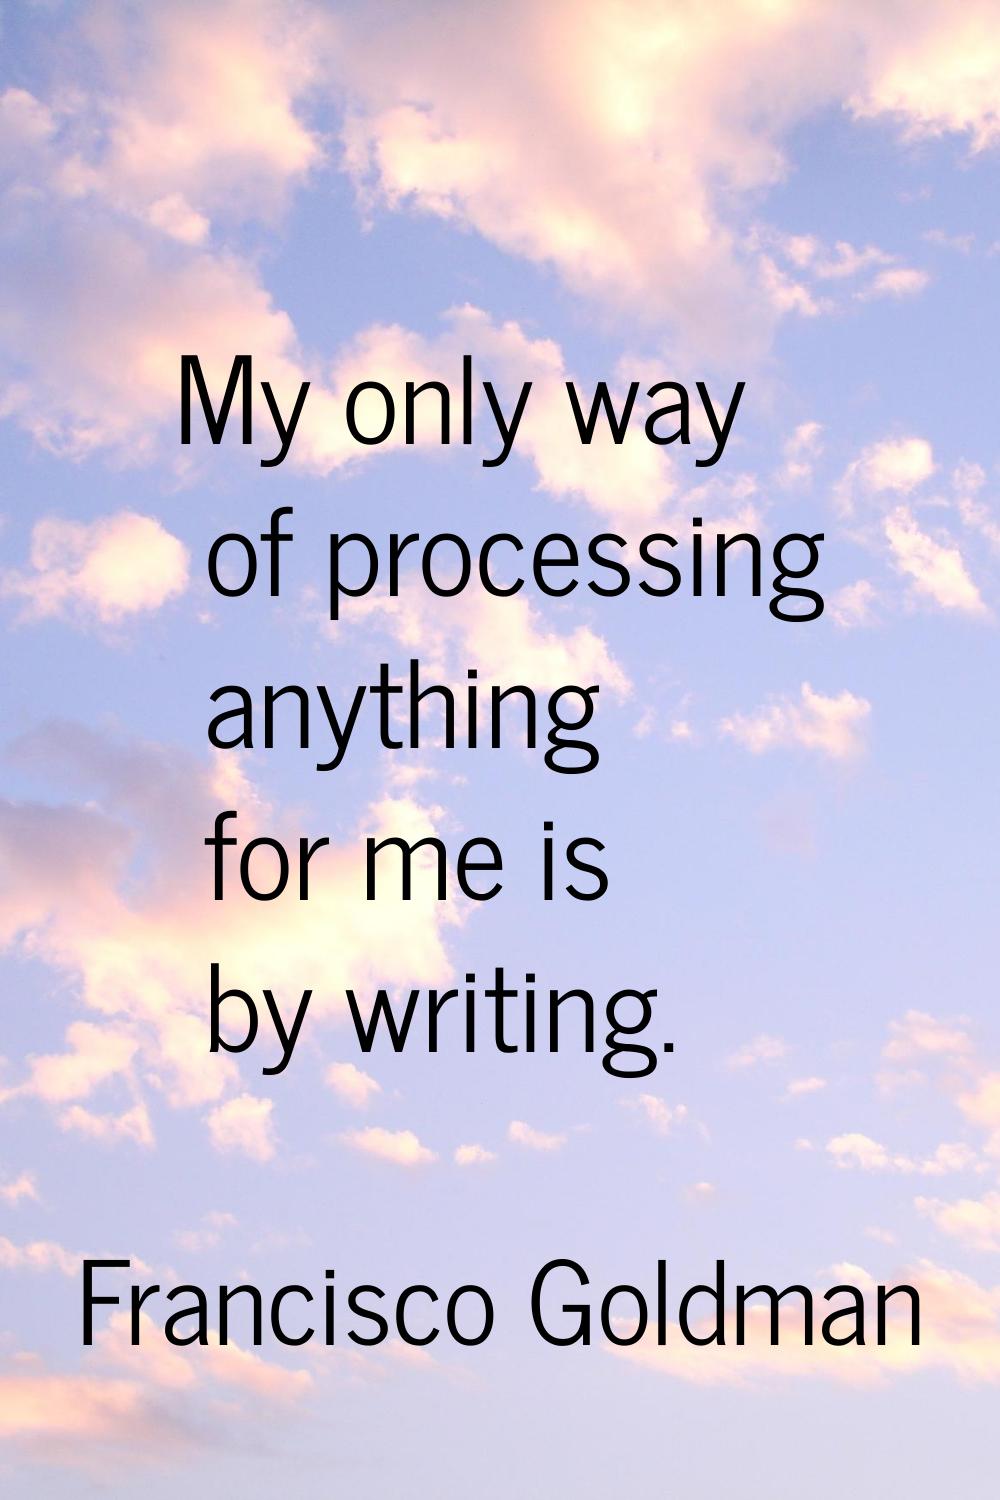 My only way of processing anything for me is by writing.